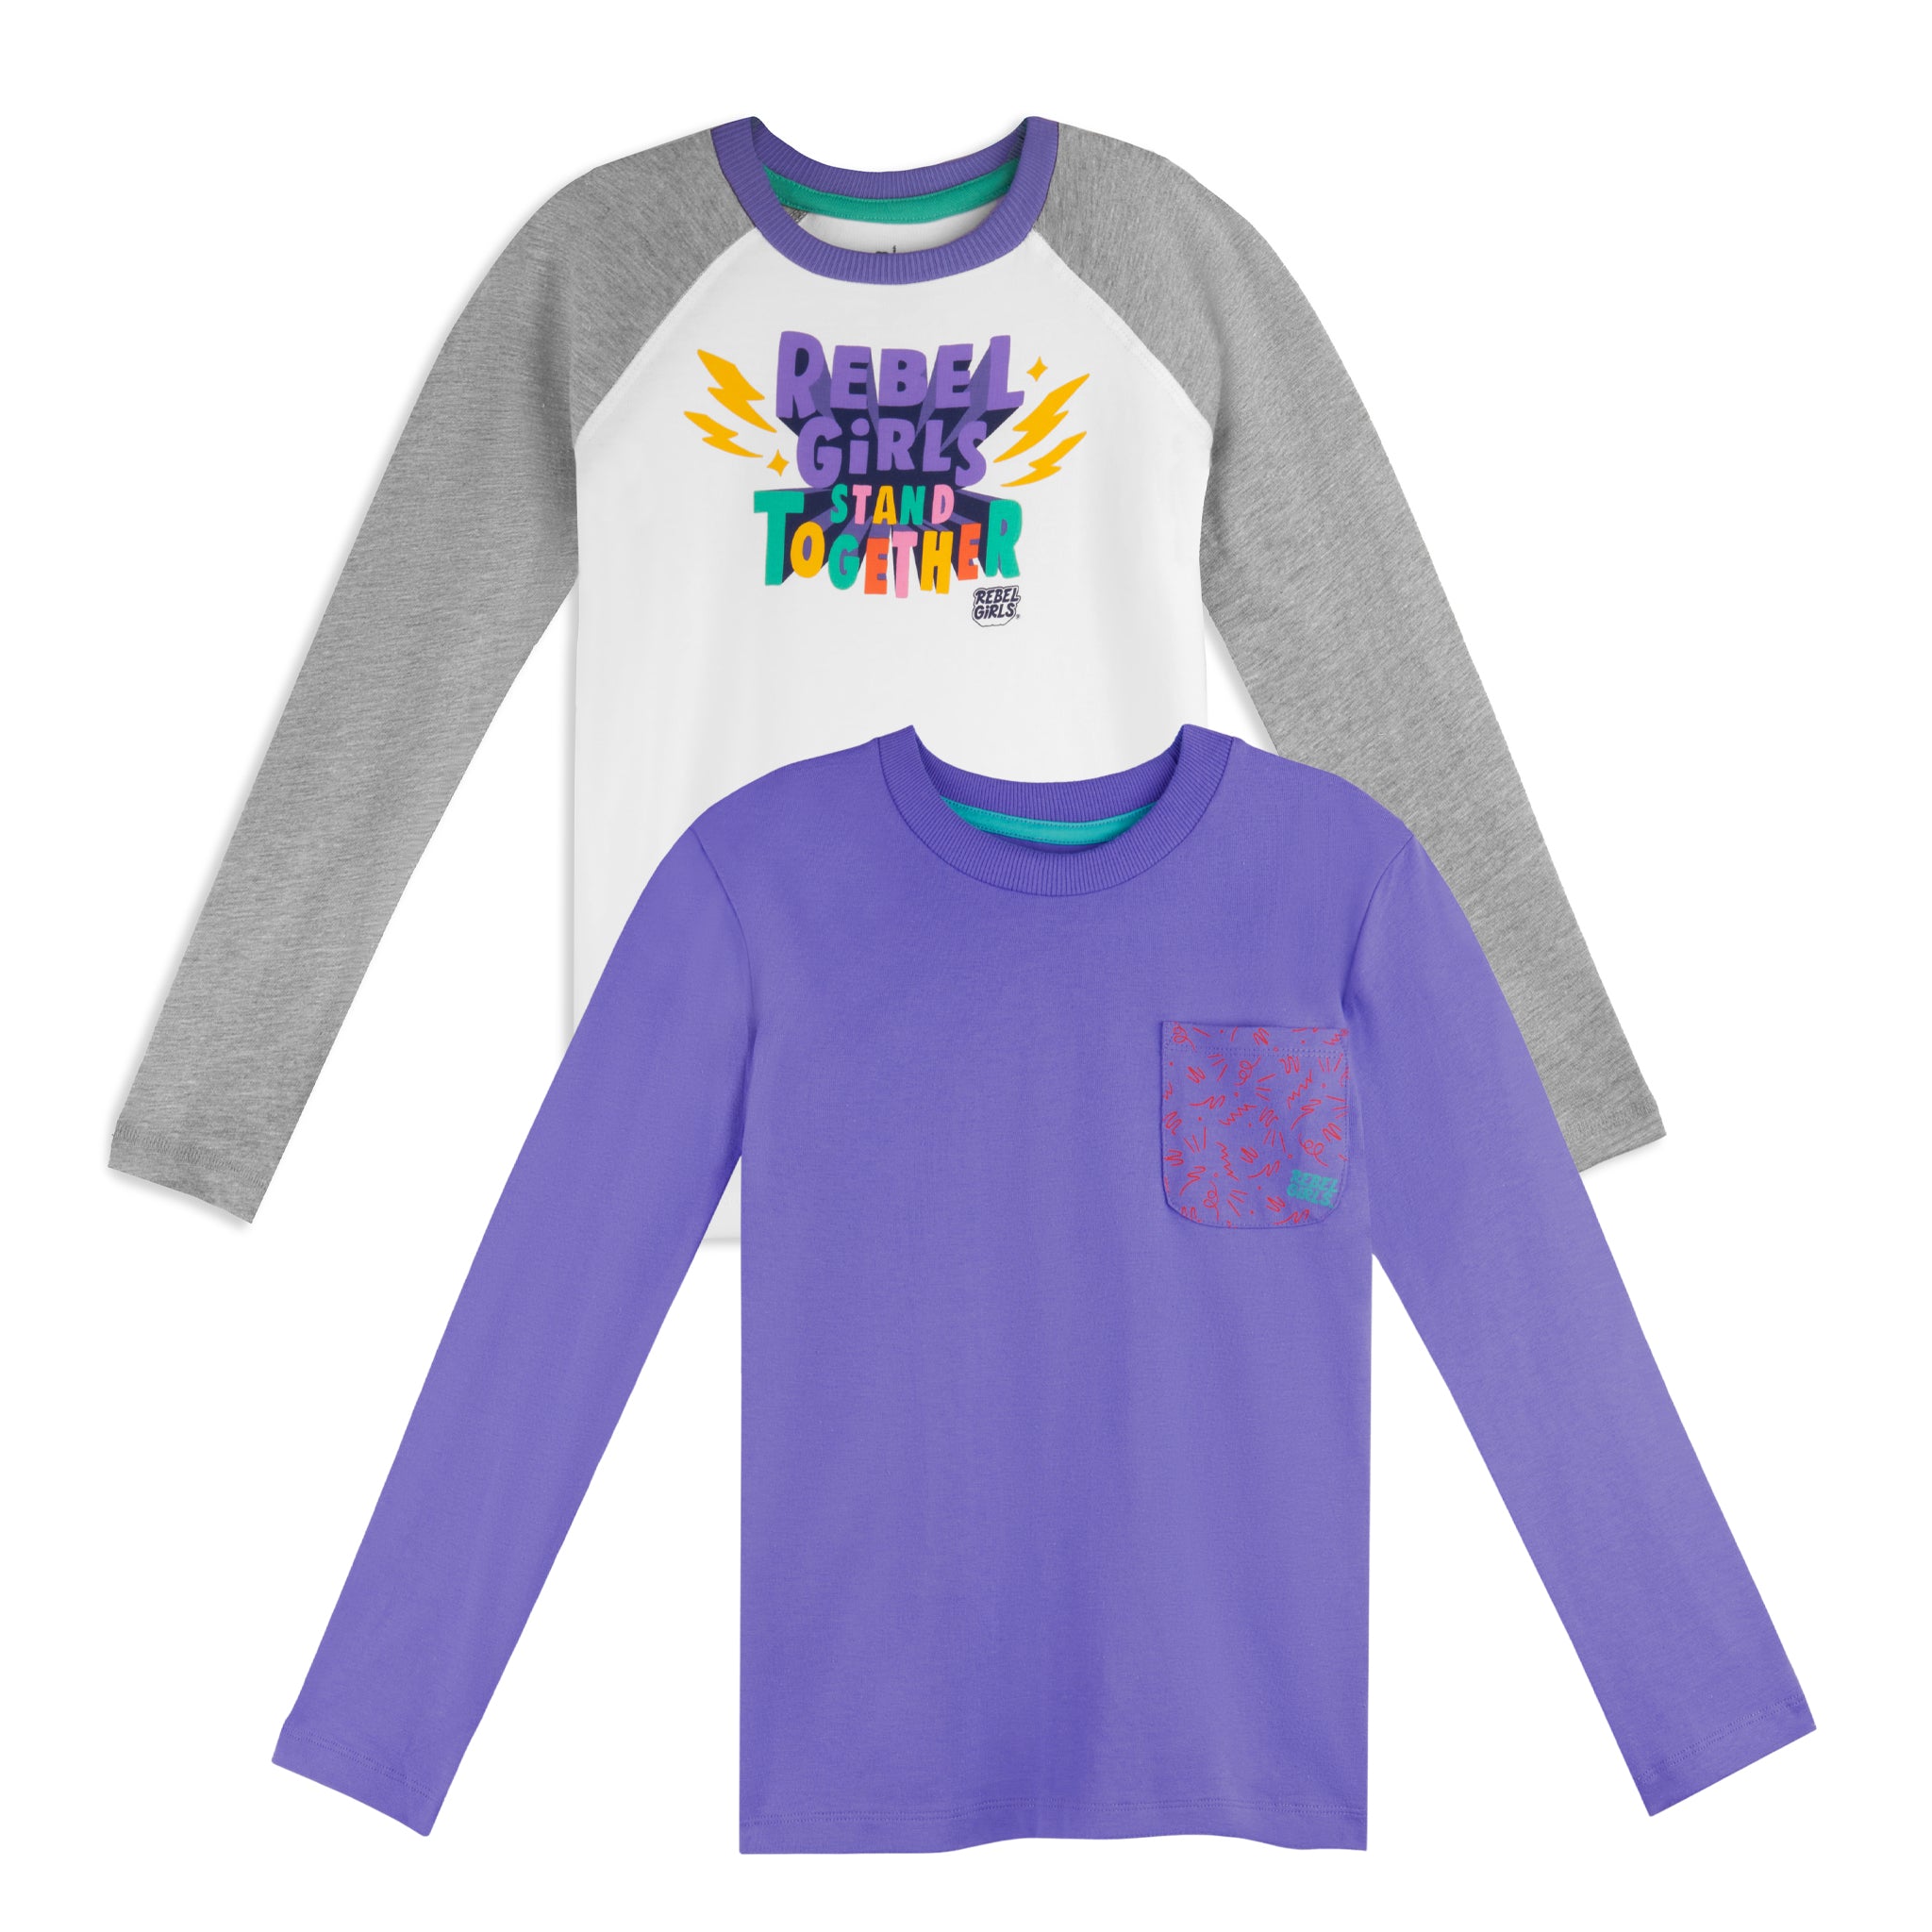 Shop Now: Adorable Gifts for Little Girls - Set of Two Long-Sleeved Shirts